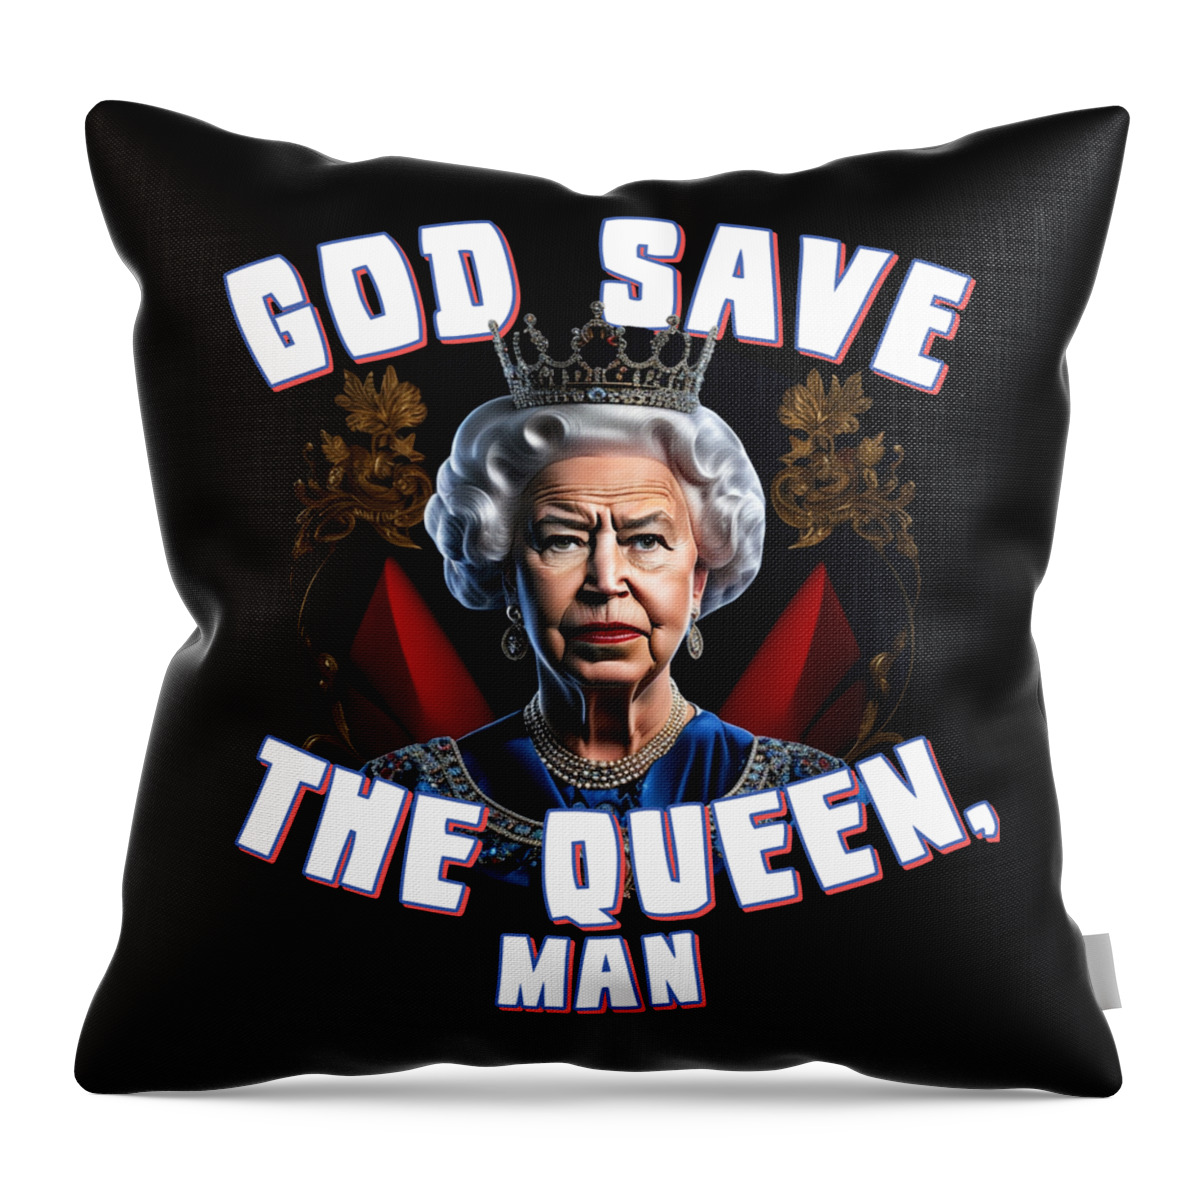 Funny Throw Pillow featuring the digital art God Save the Queen Man by Flippin Sweet Gear